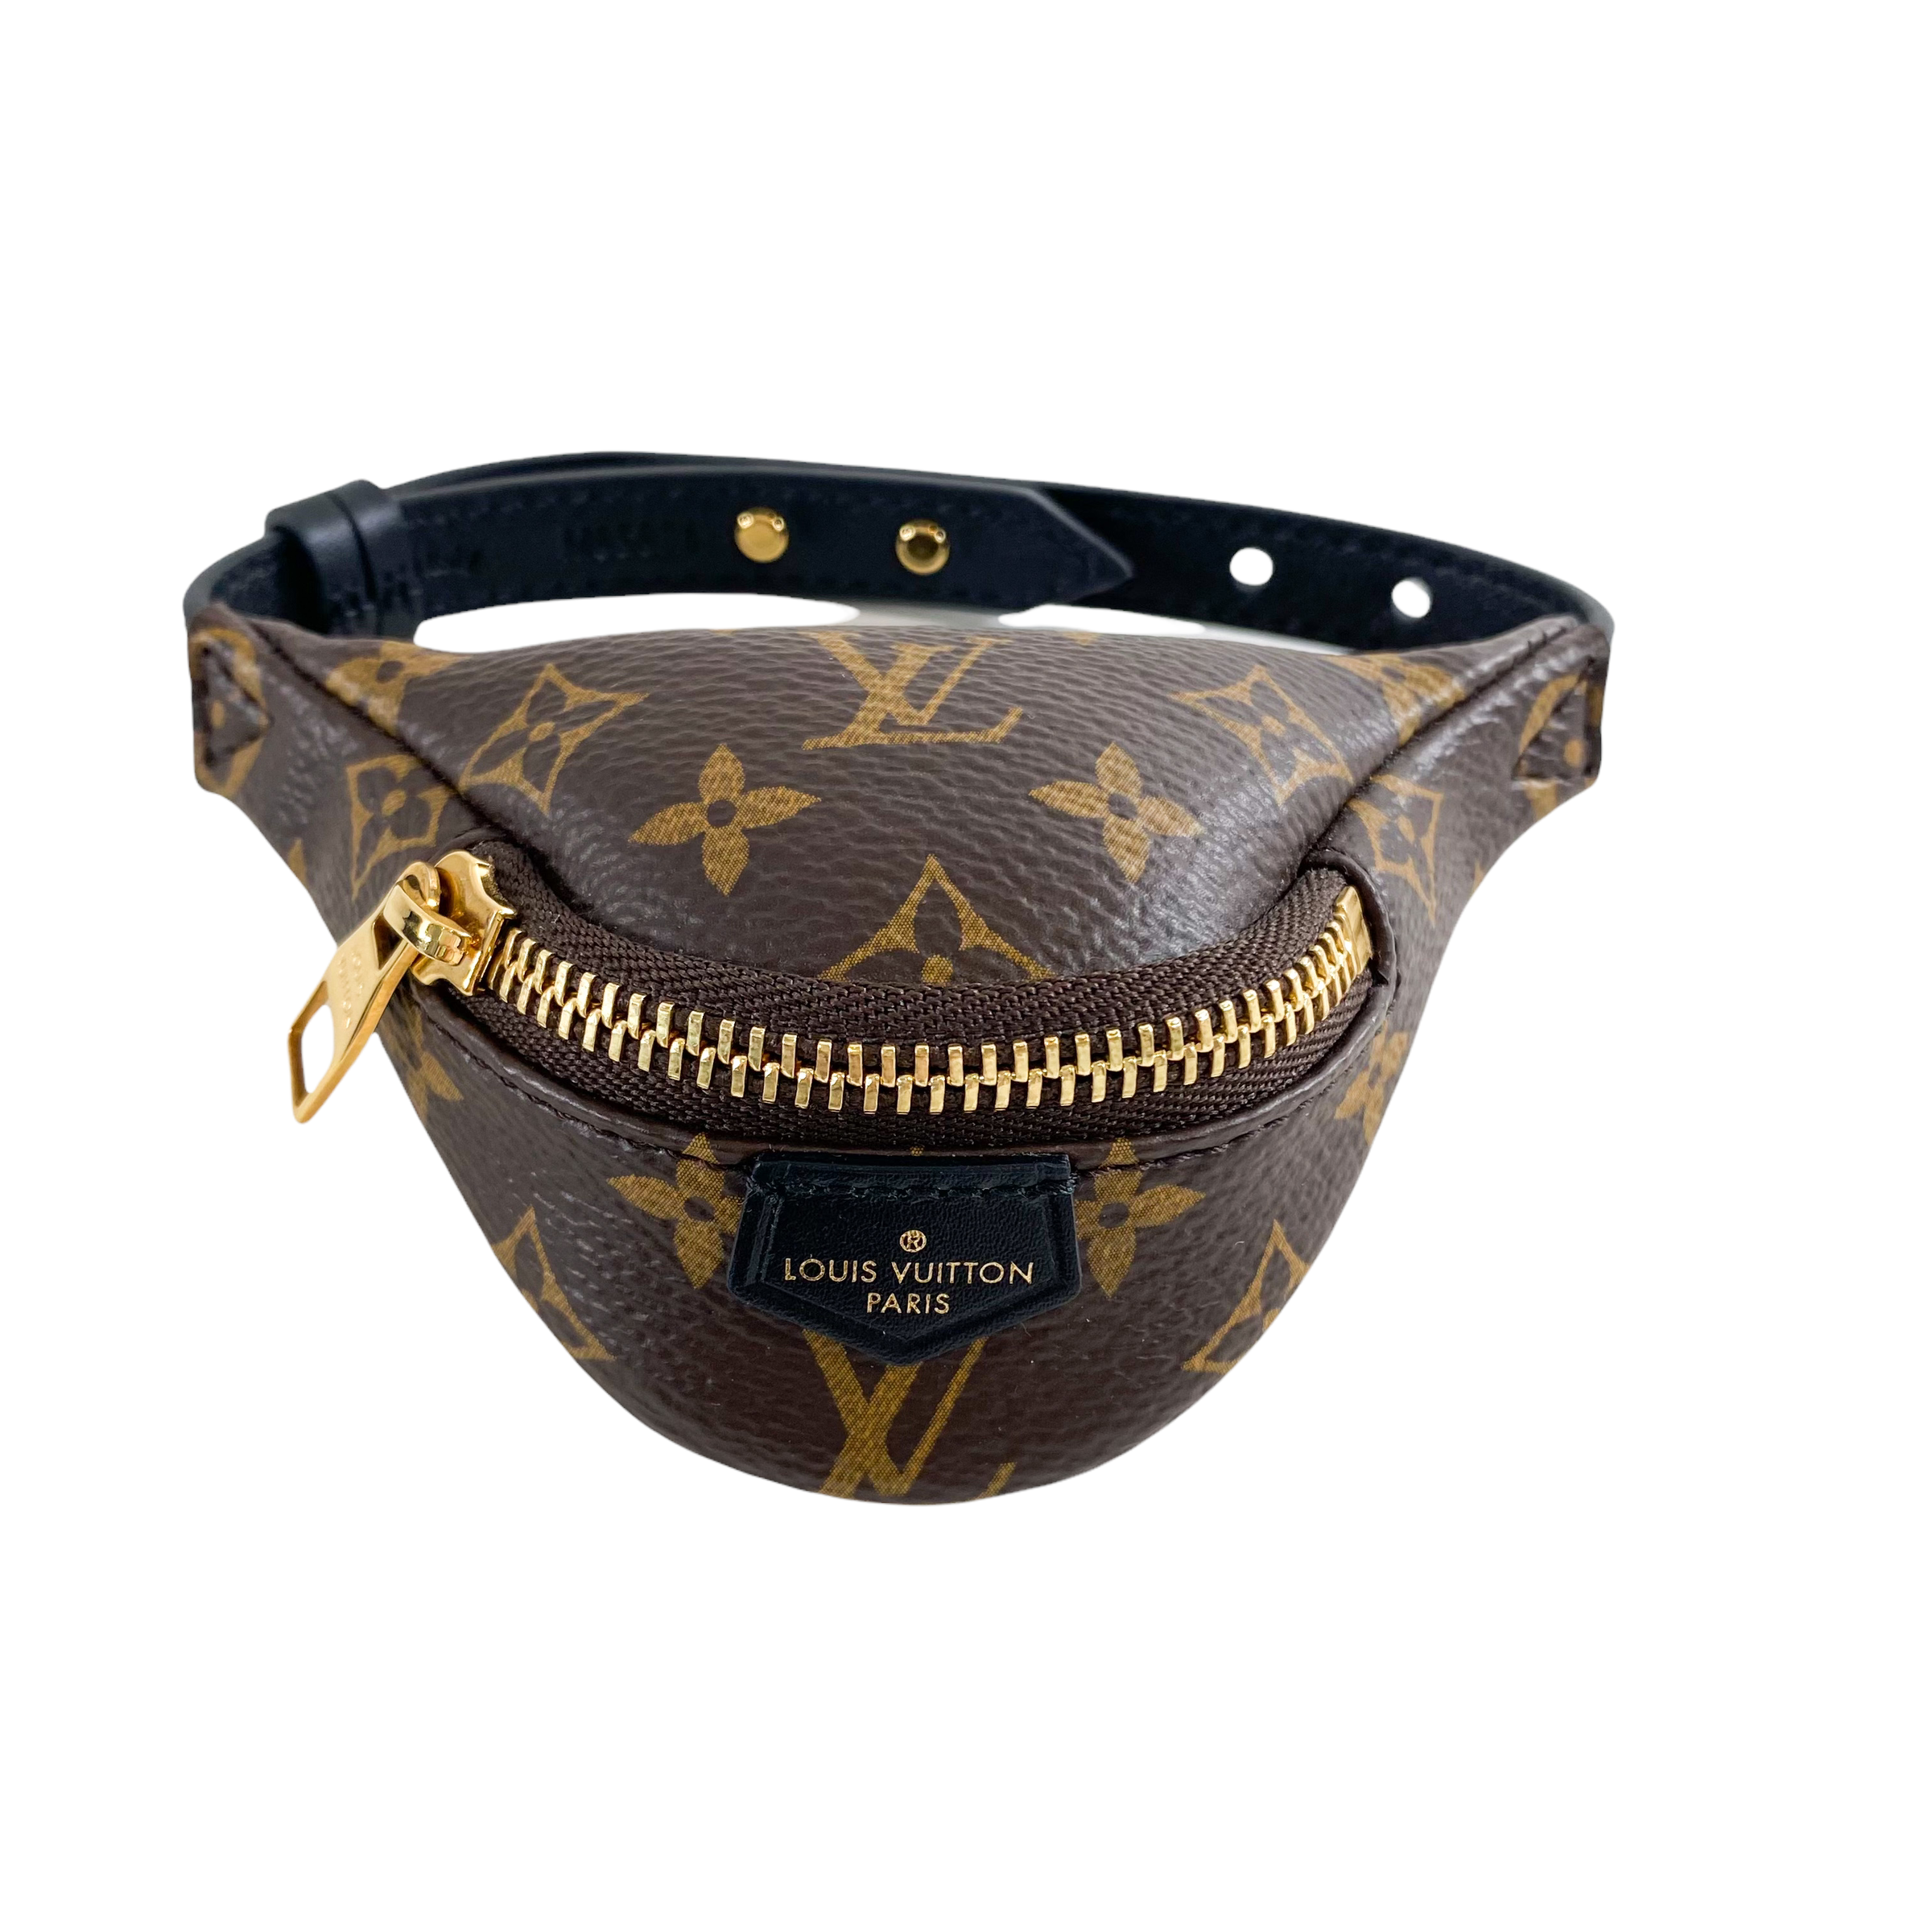 Louis Vuitton Cruise 2020 Backpack & Bumbag Party Bracelets